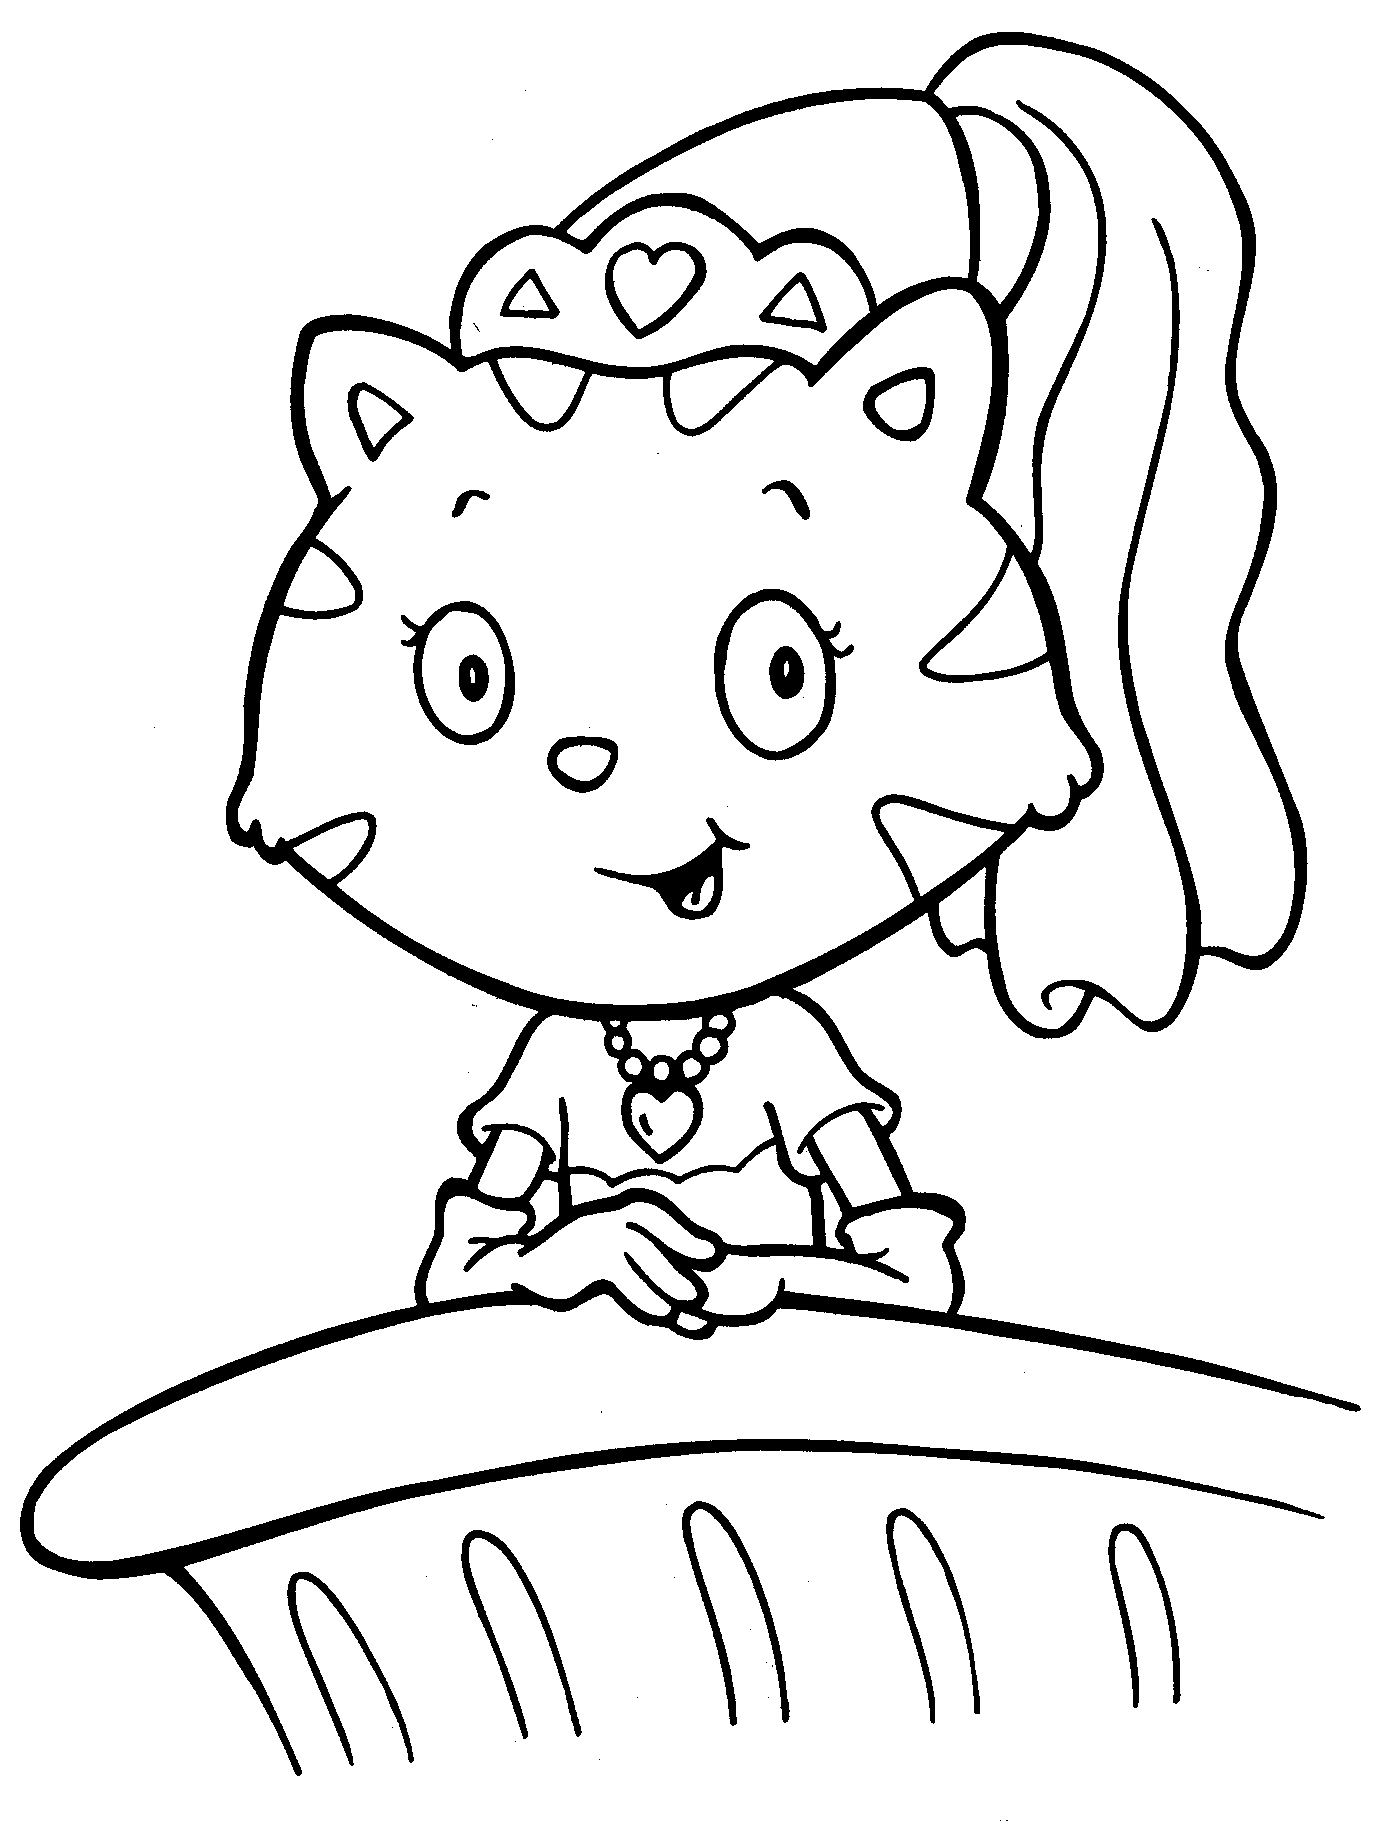 Kitten Coloring Pages - Best Coloring Pages For Kids